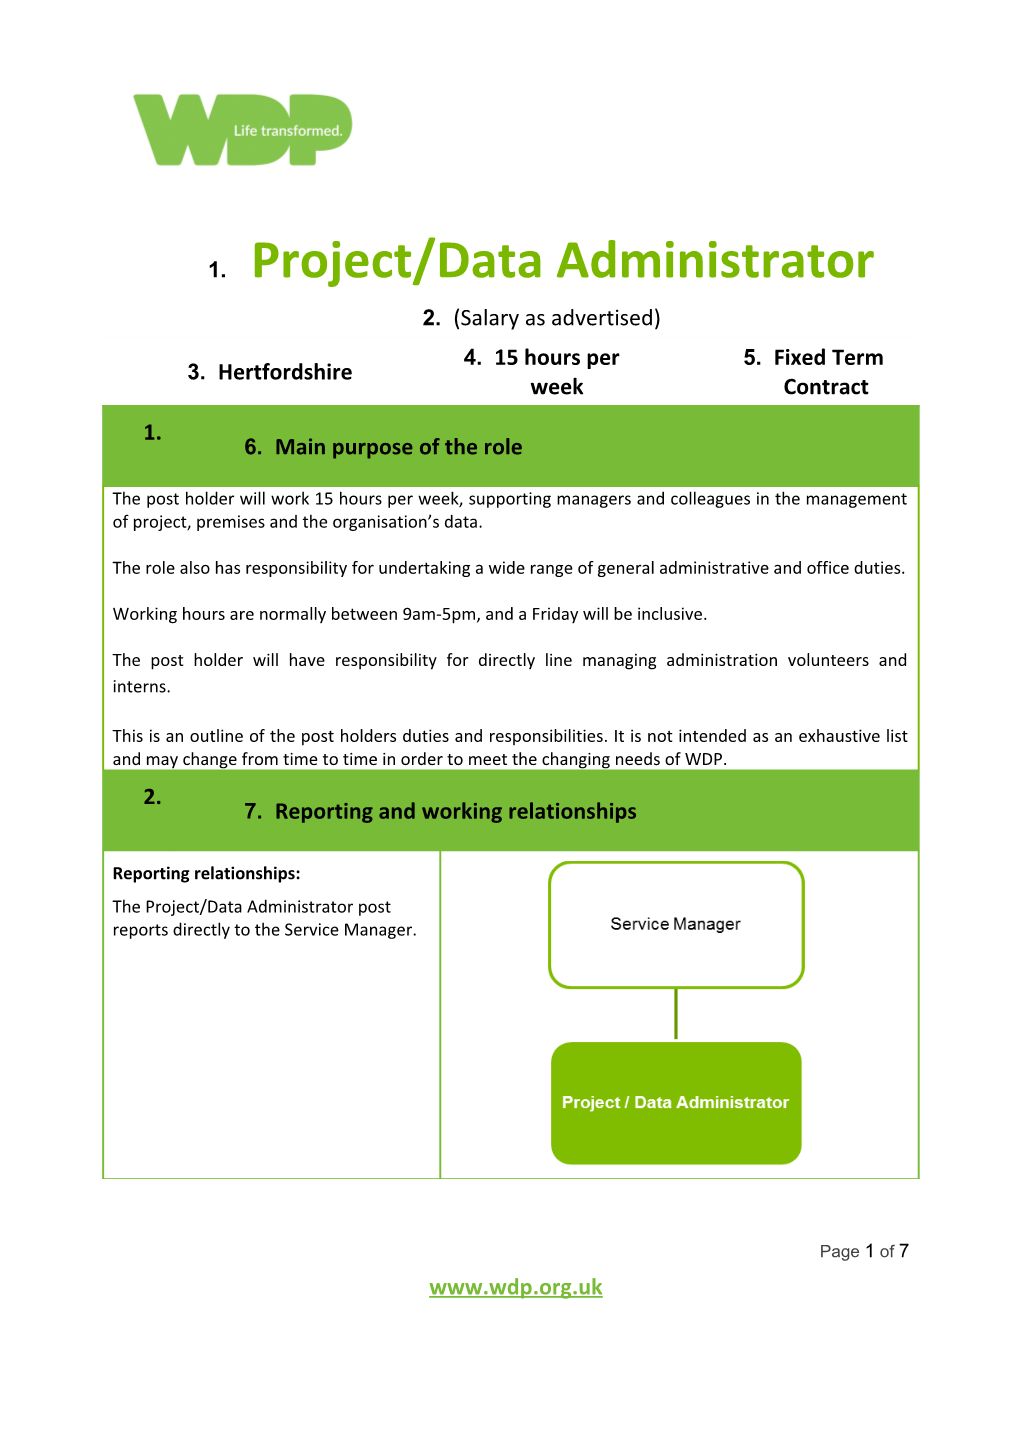 Project/Data Administrator